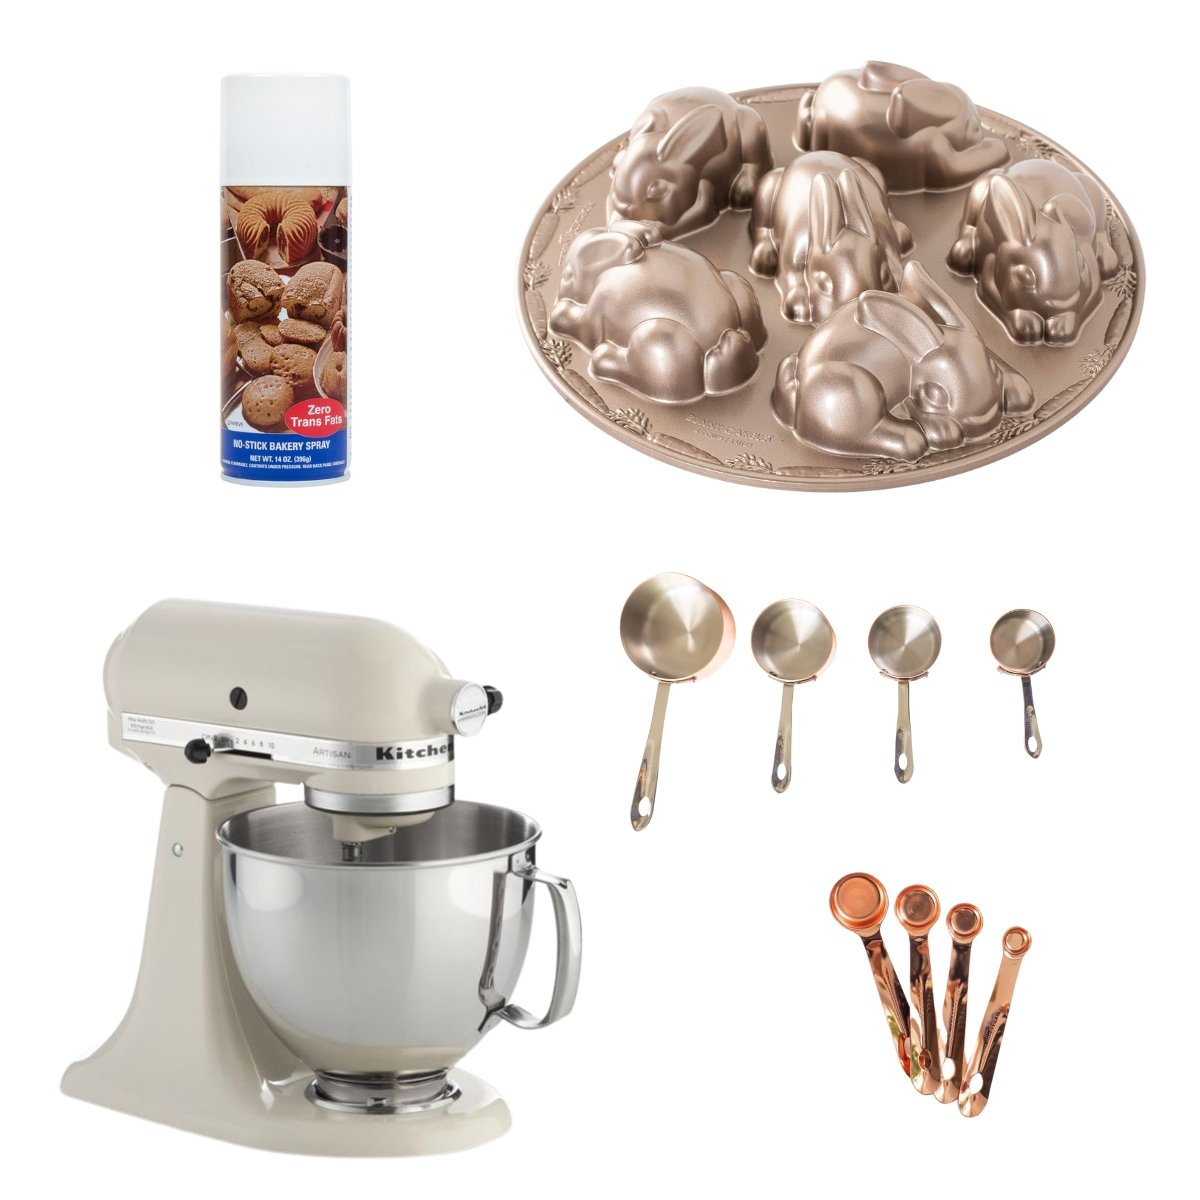 Looking to bake the perfect Easter Bunny Cake? This collection of kitchen essentials includes a kitchen aid mixer, a spoon, a spatula, and other must-have items to help you create a delightful dessert.